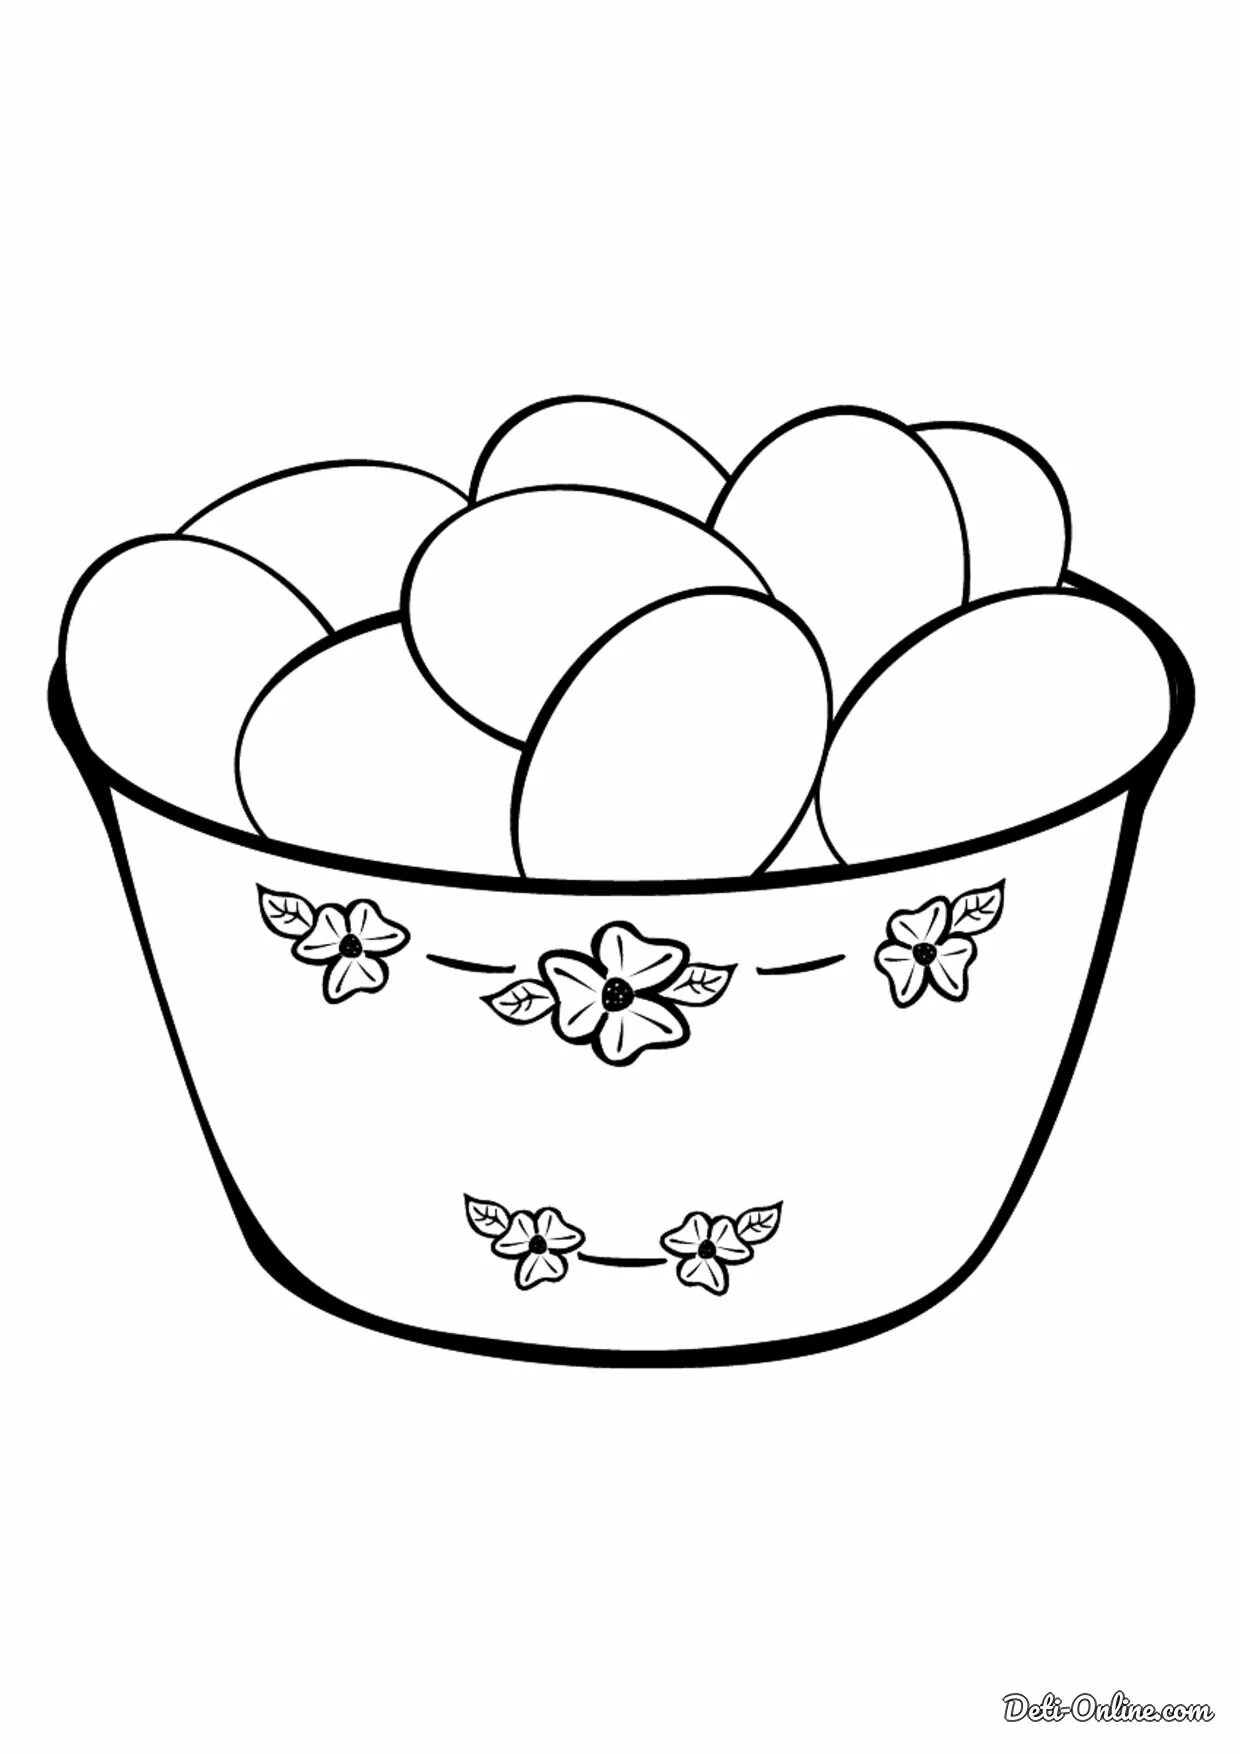 Awesome chicken egg coloring page